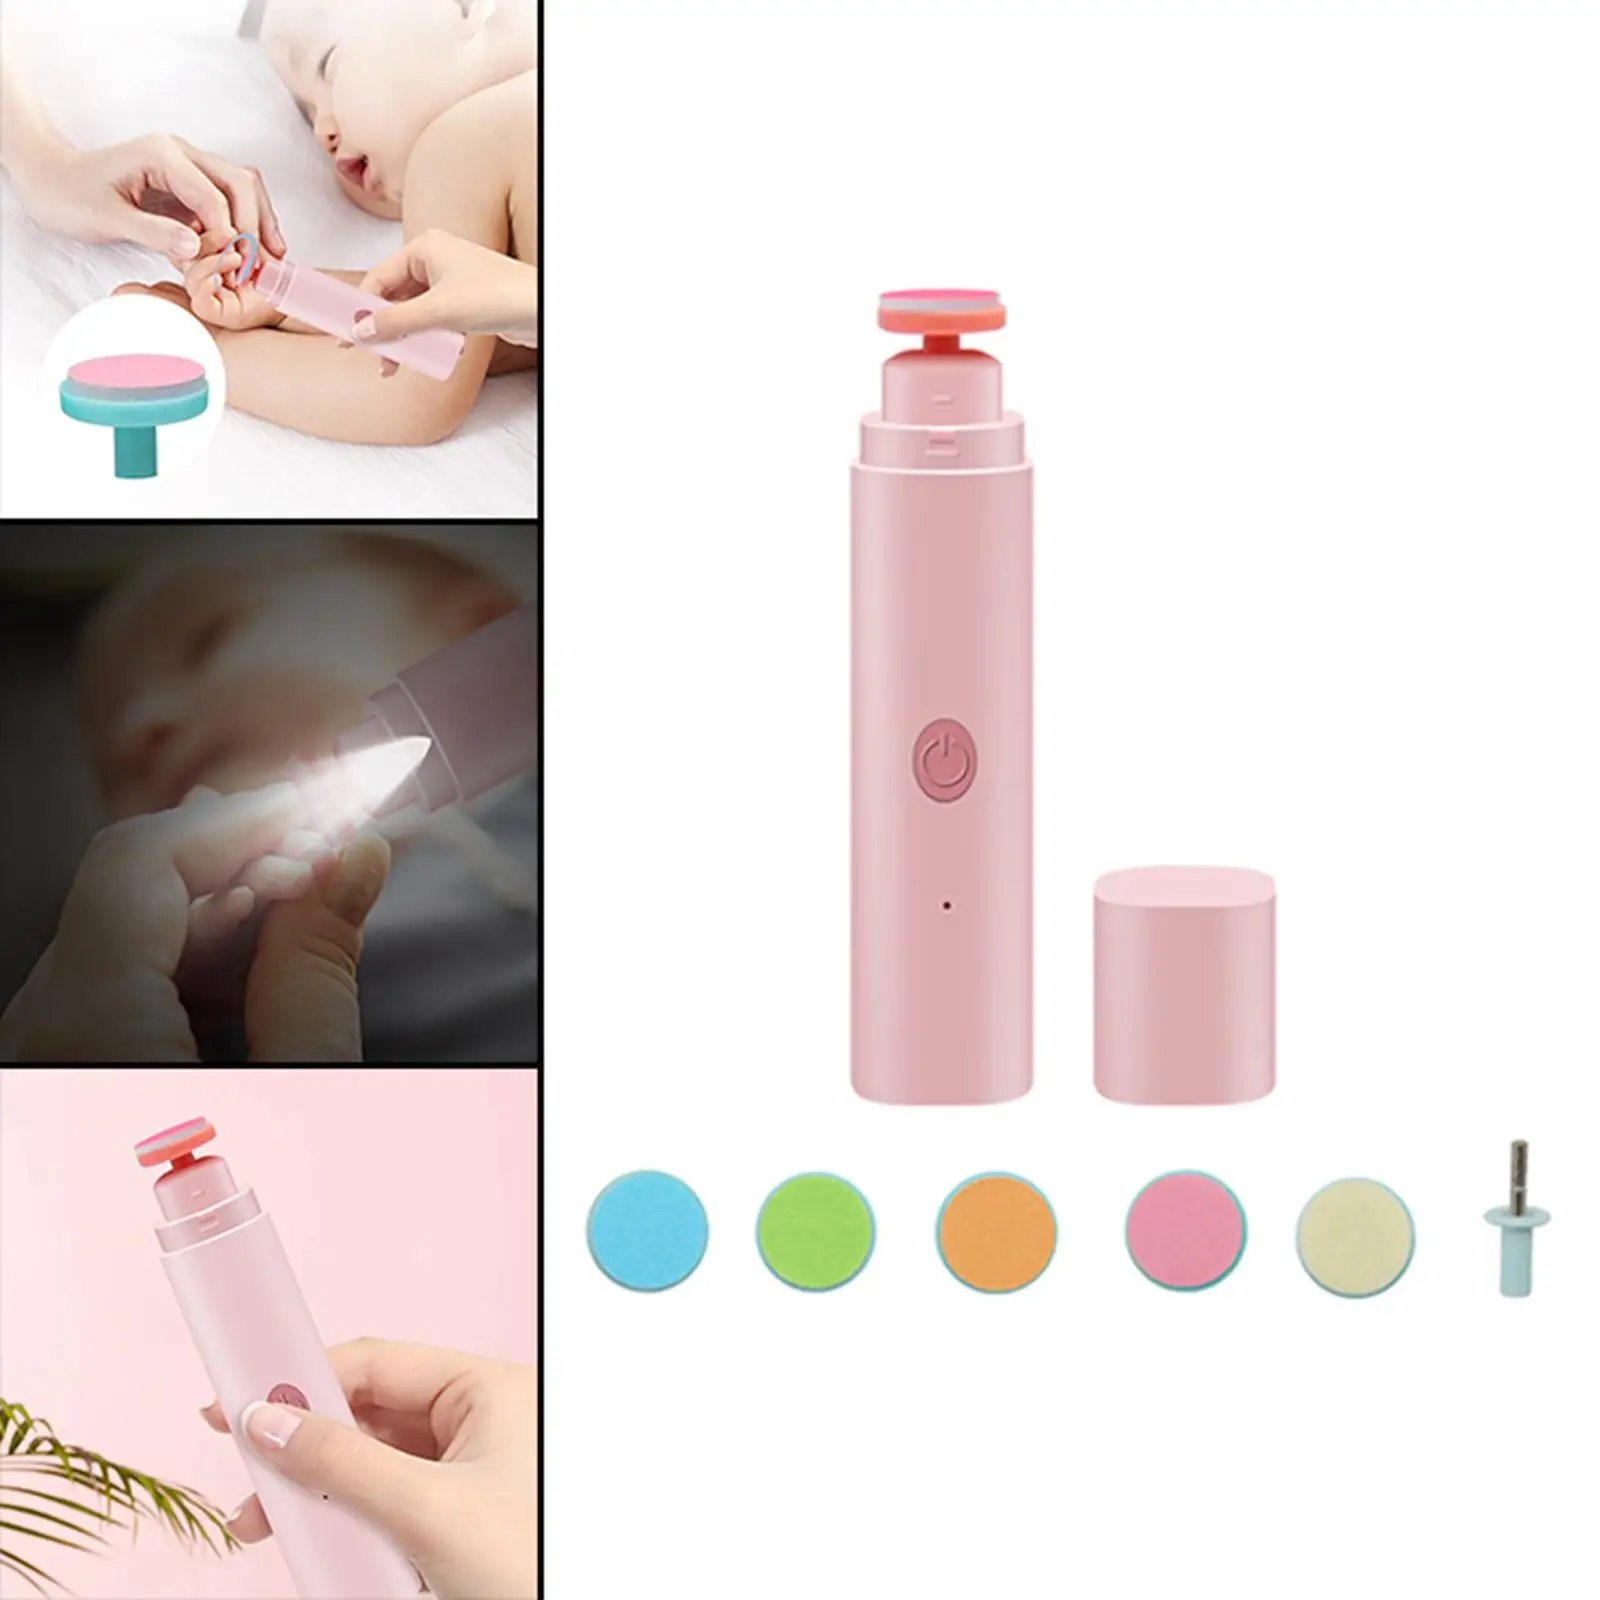 Nail File Drill for Baby Safe 6 Grinding Heads Grooming Manicure Care LED Light Nail Trimmer Cutter for Toes Fingers Kids Adults